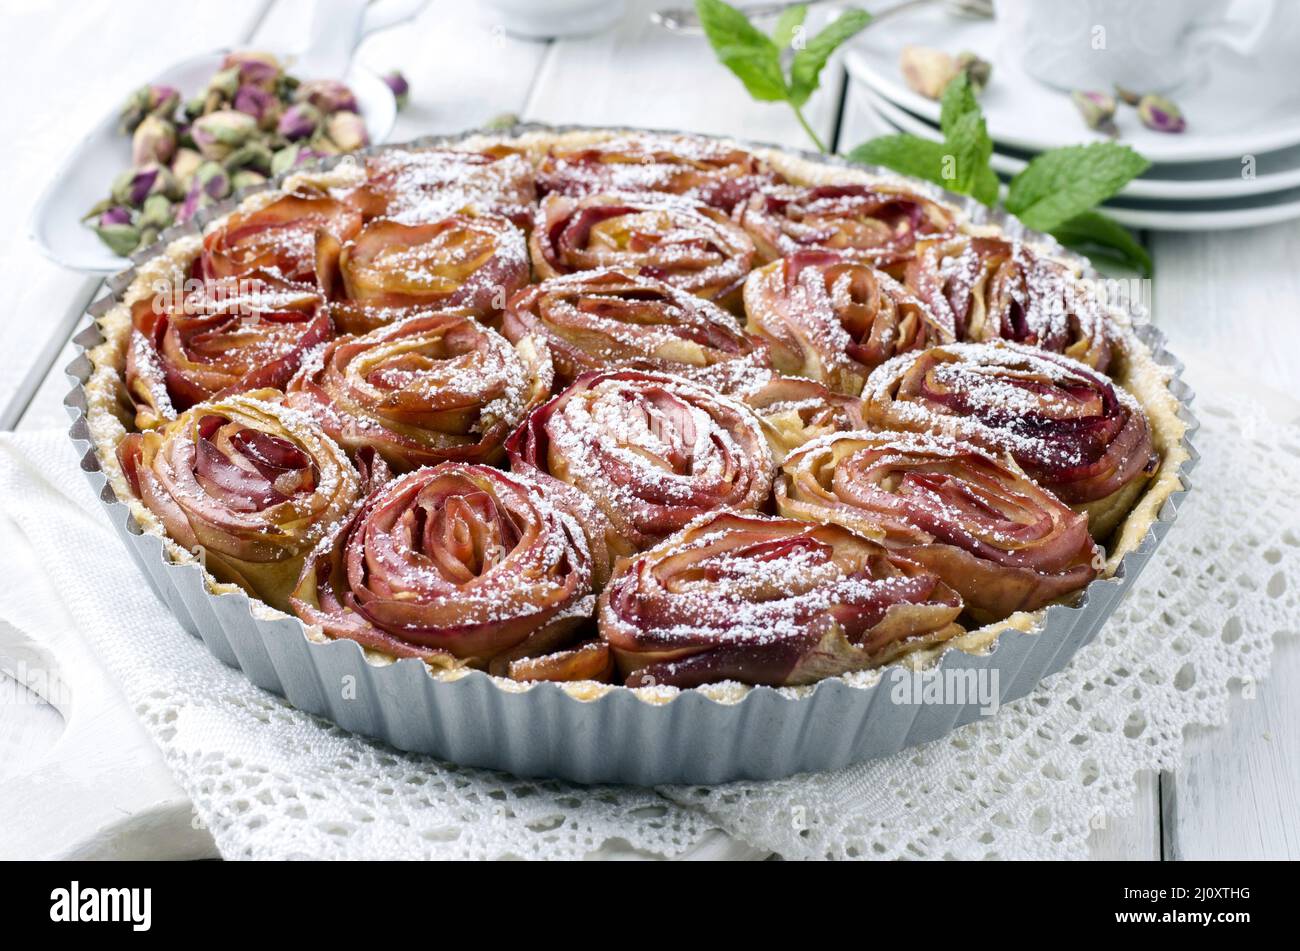 French apple pastry Stock Photo